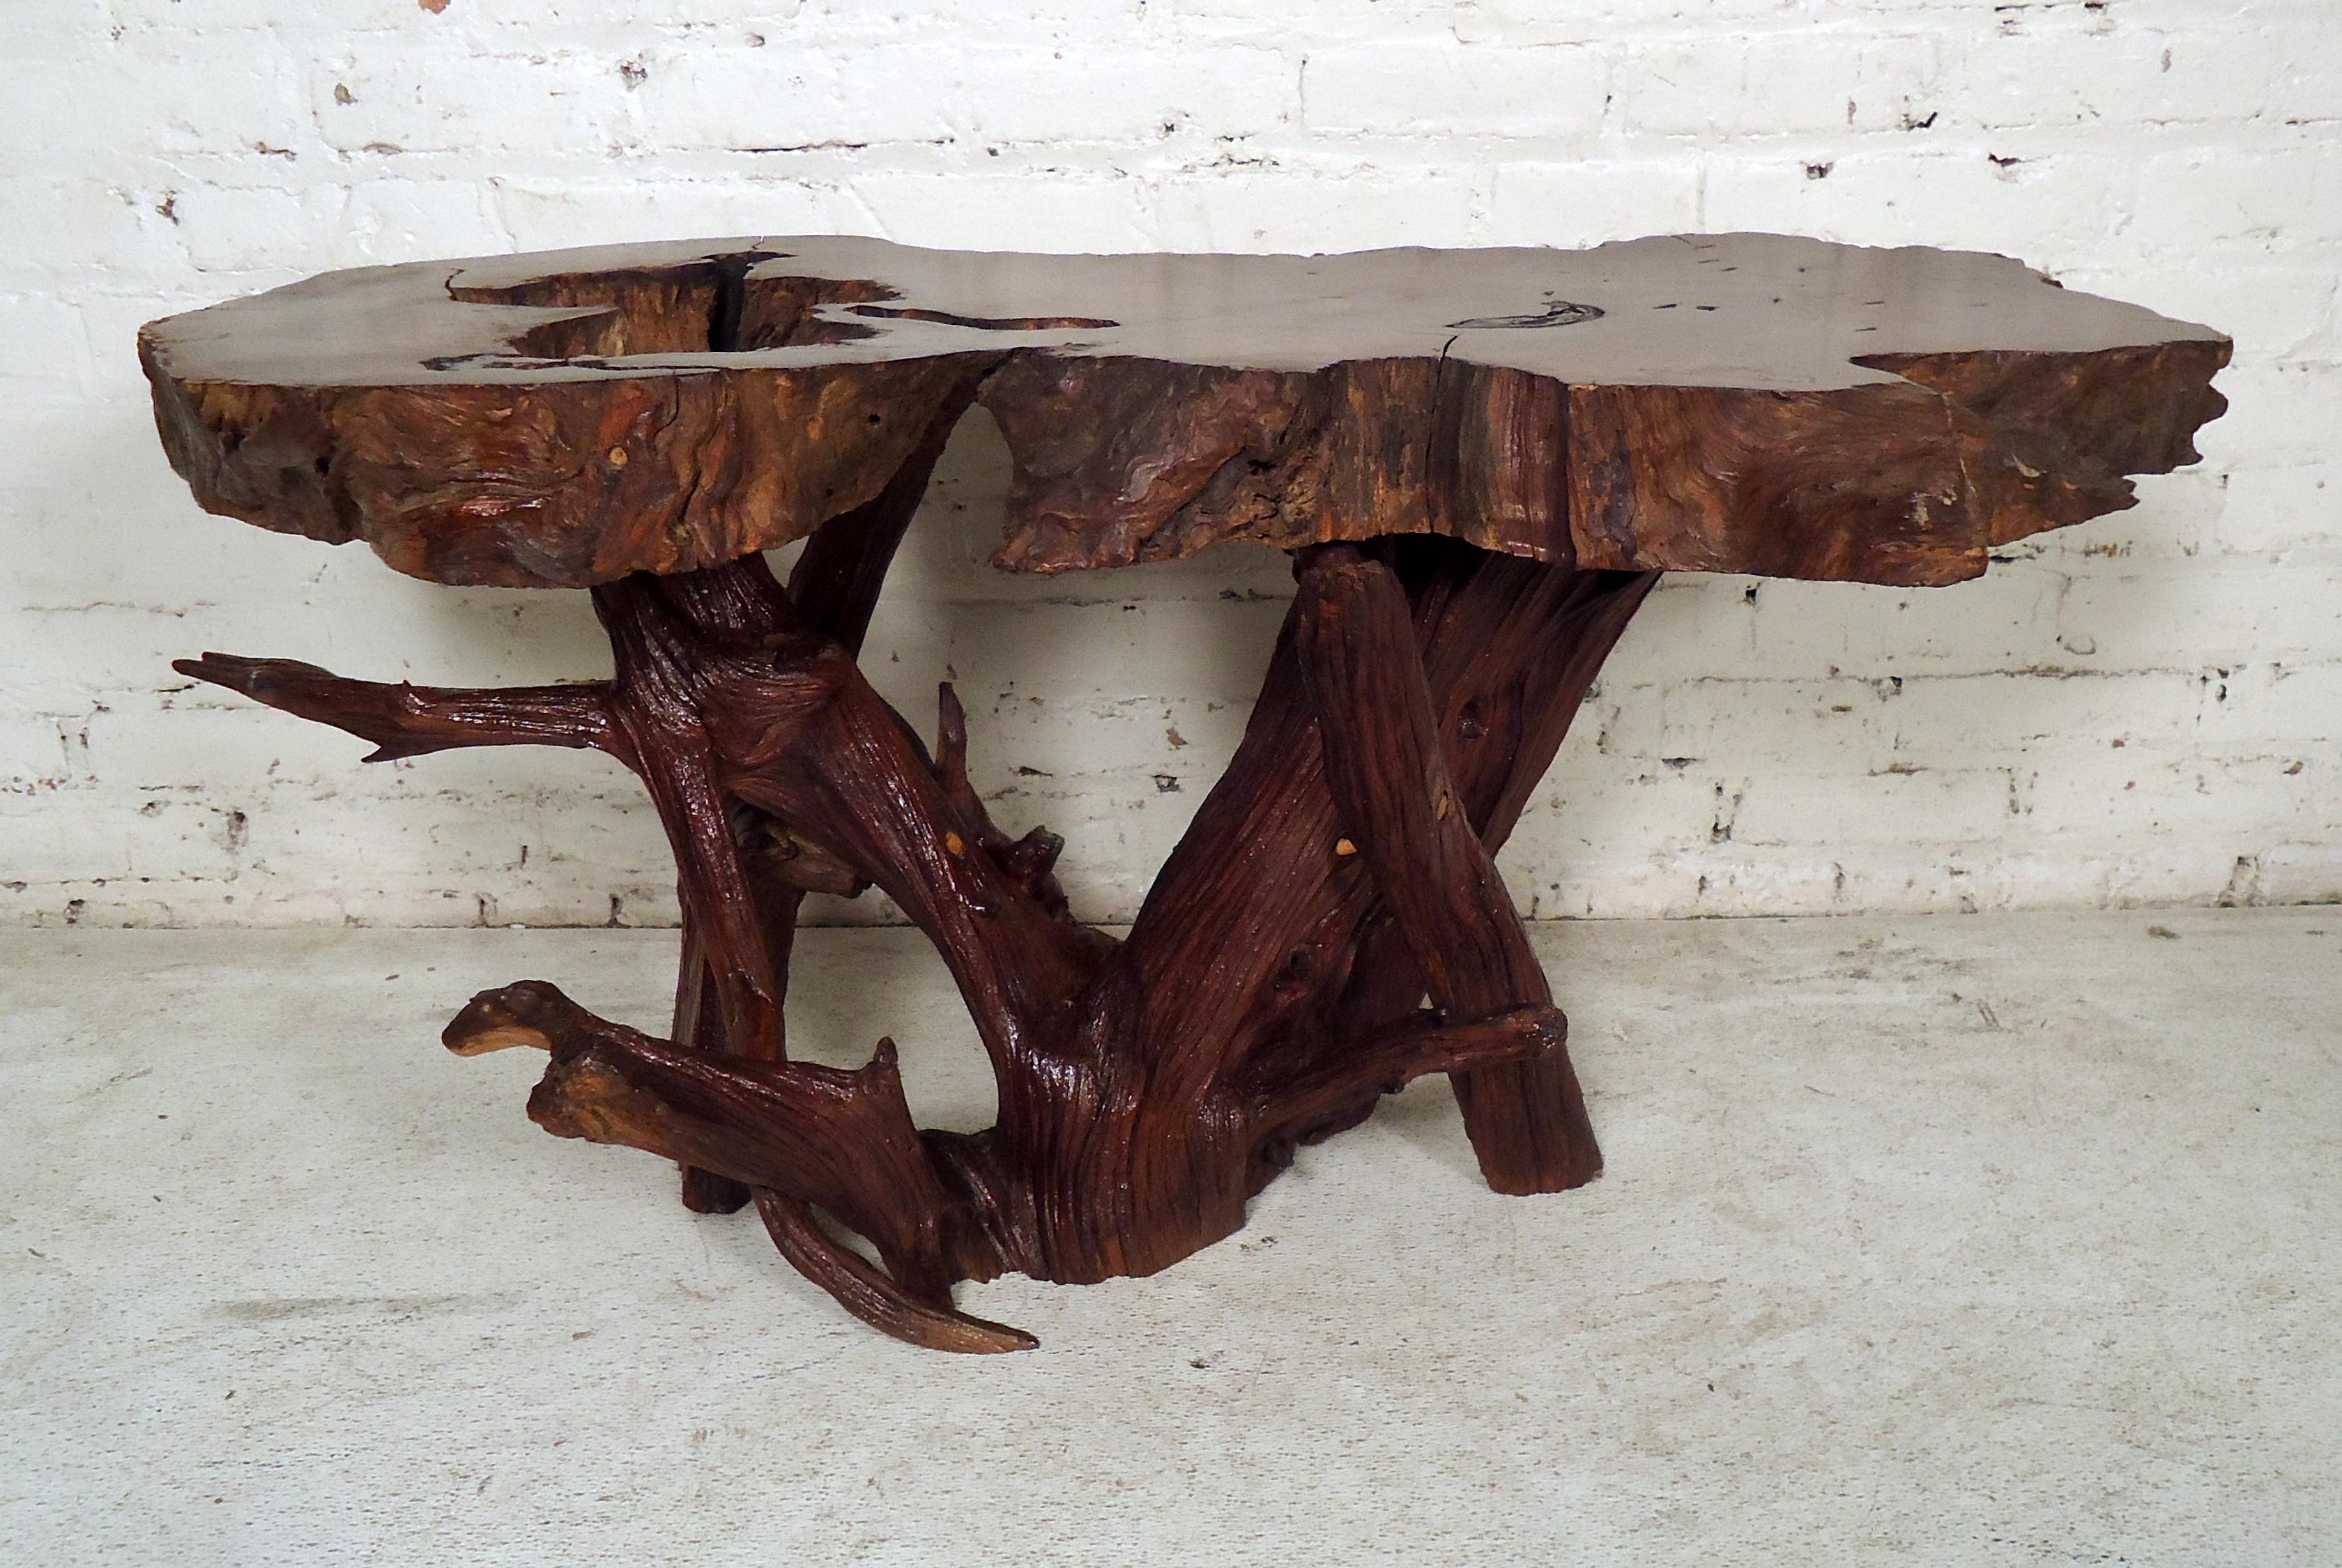 This beautiful vintage modern live edge bench features a unique tree slab top with elegant wood grain. This stunning live edge table offers a taste of nature within any modern interior. Please confirm item location (NY or NJ).